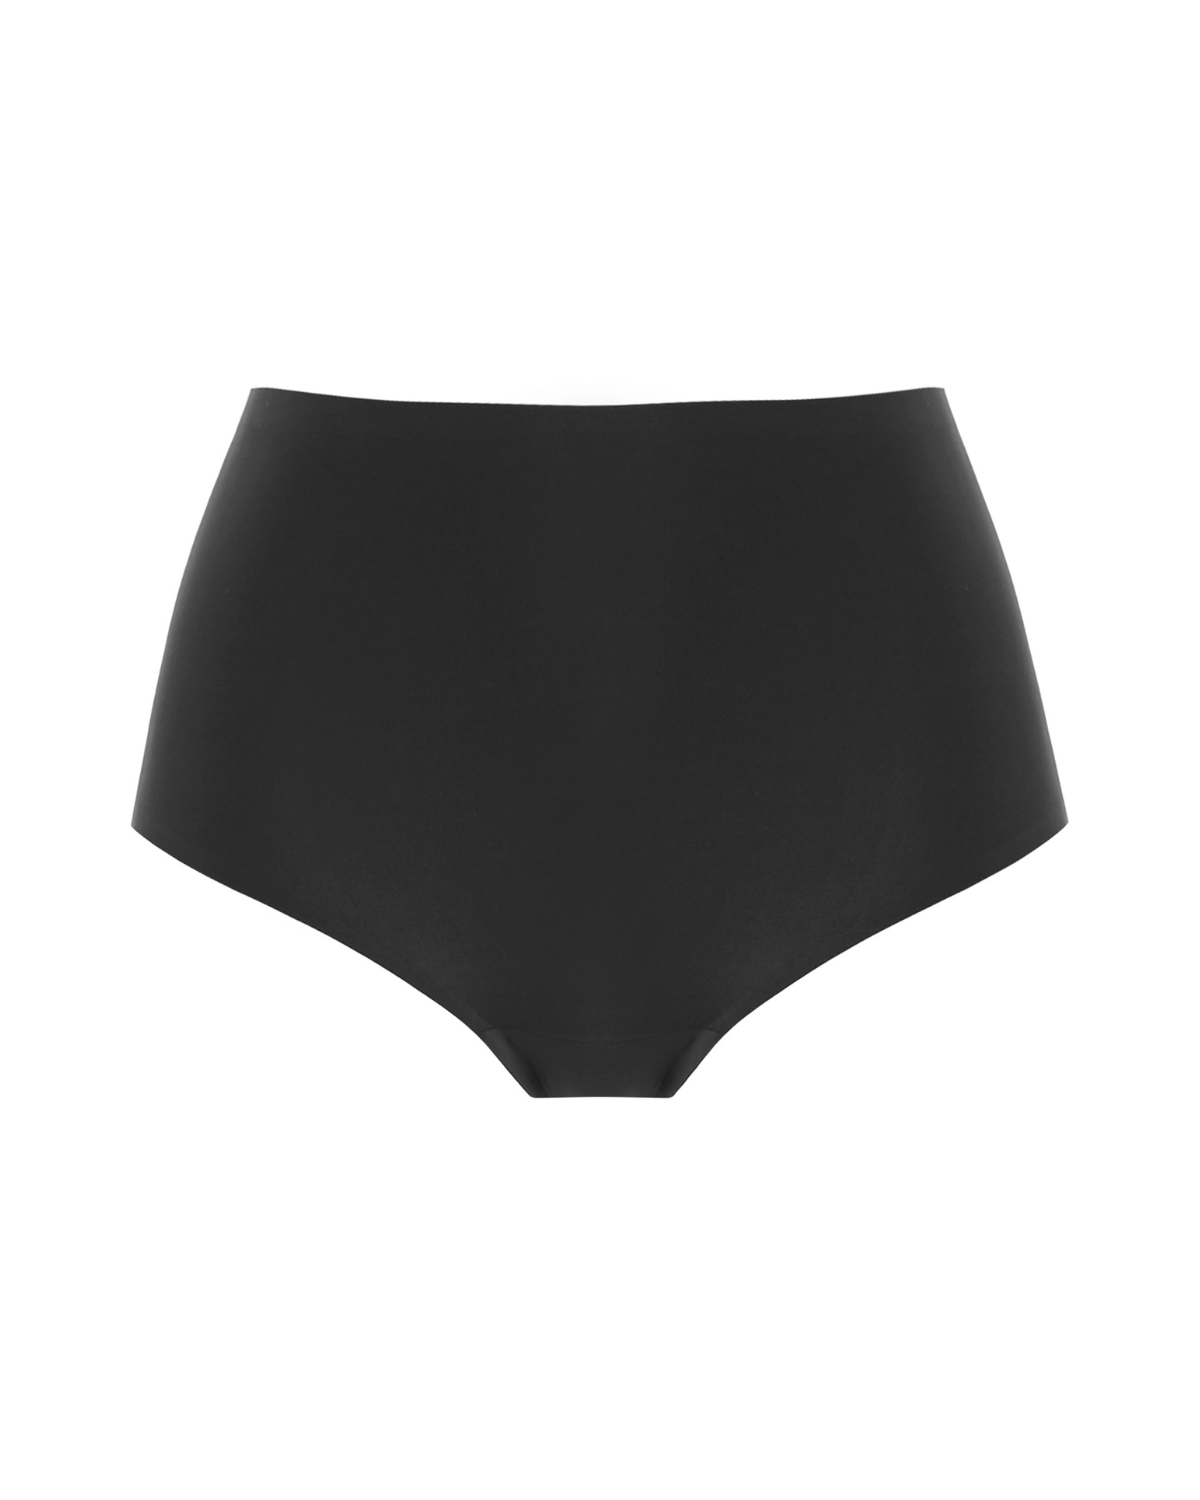 Flat lay of a seamless stretch full brief in black